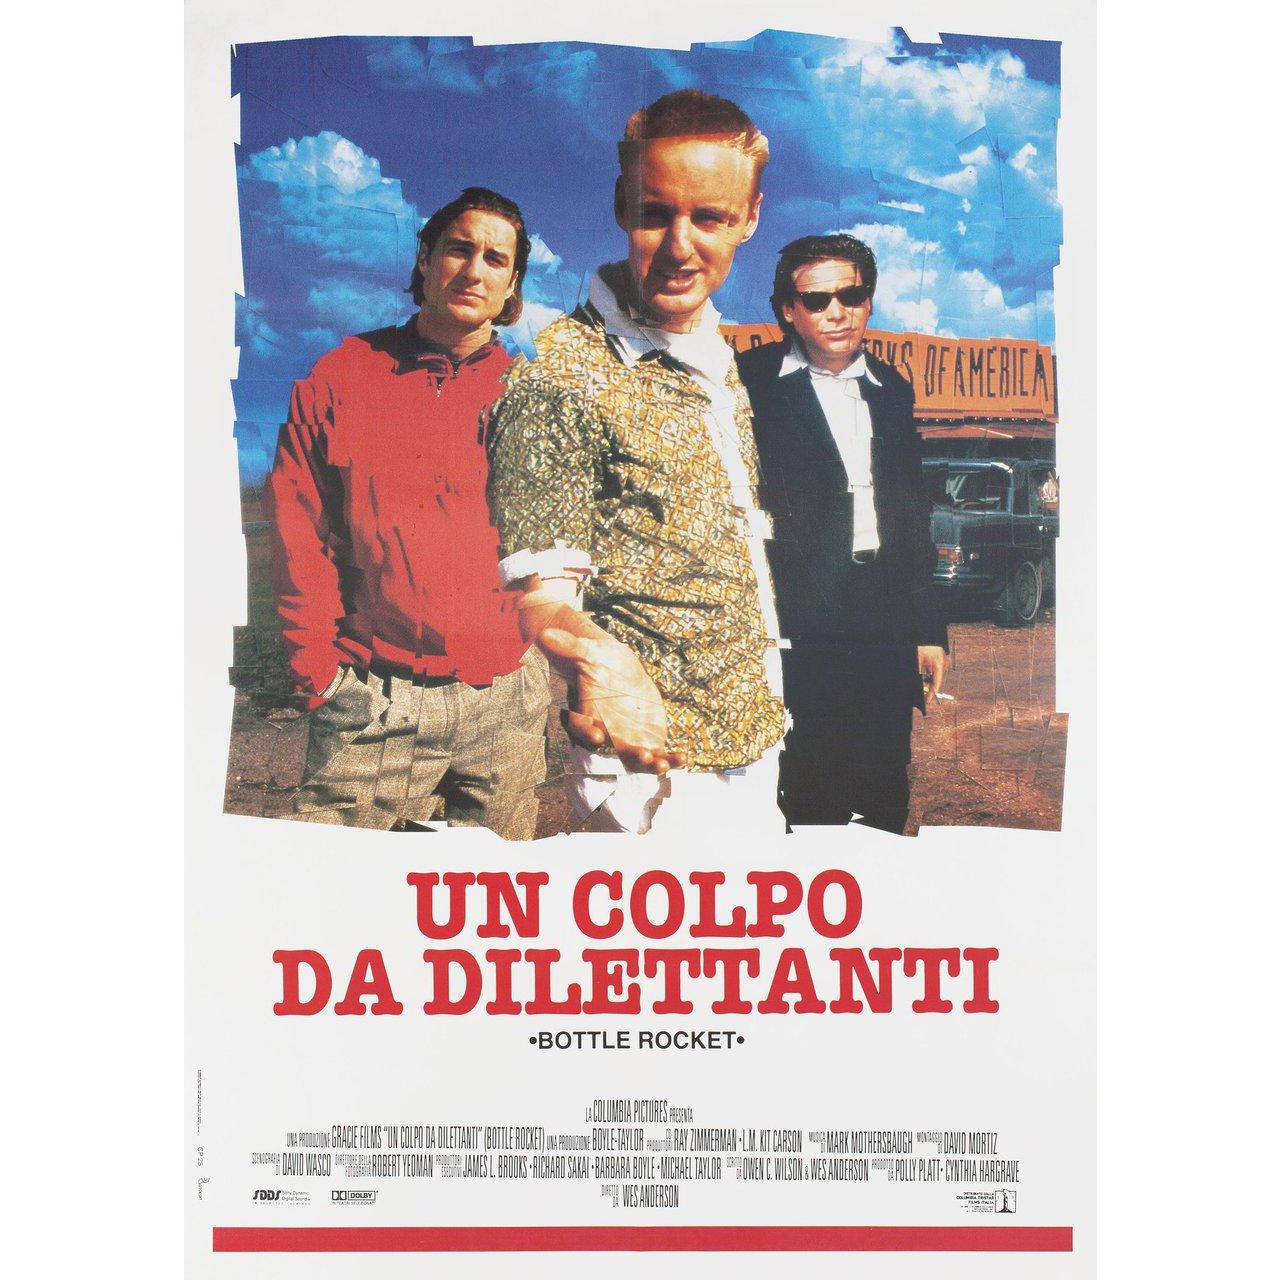 Original 1996 Italian due fogli poster for the film Bottle Rocket directed by Wes Anderson with Luke Wilson / Owen Wilson / Ned Dowd / Shea Fowler. Very Good-Fine condition, rolled. Please note: the size is stated in inches and the actual size can